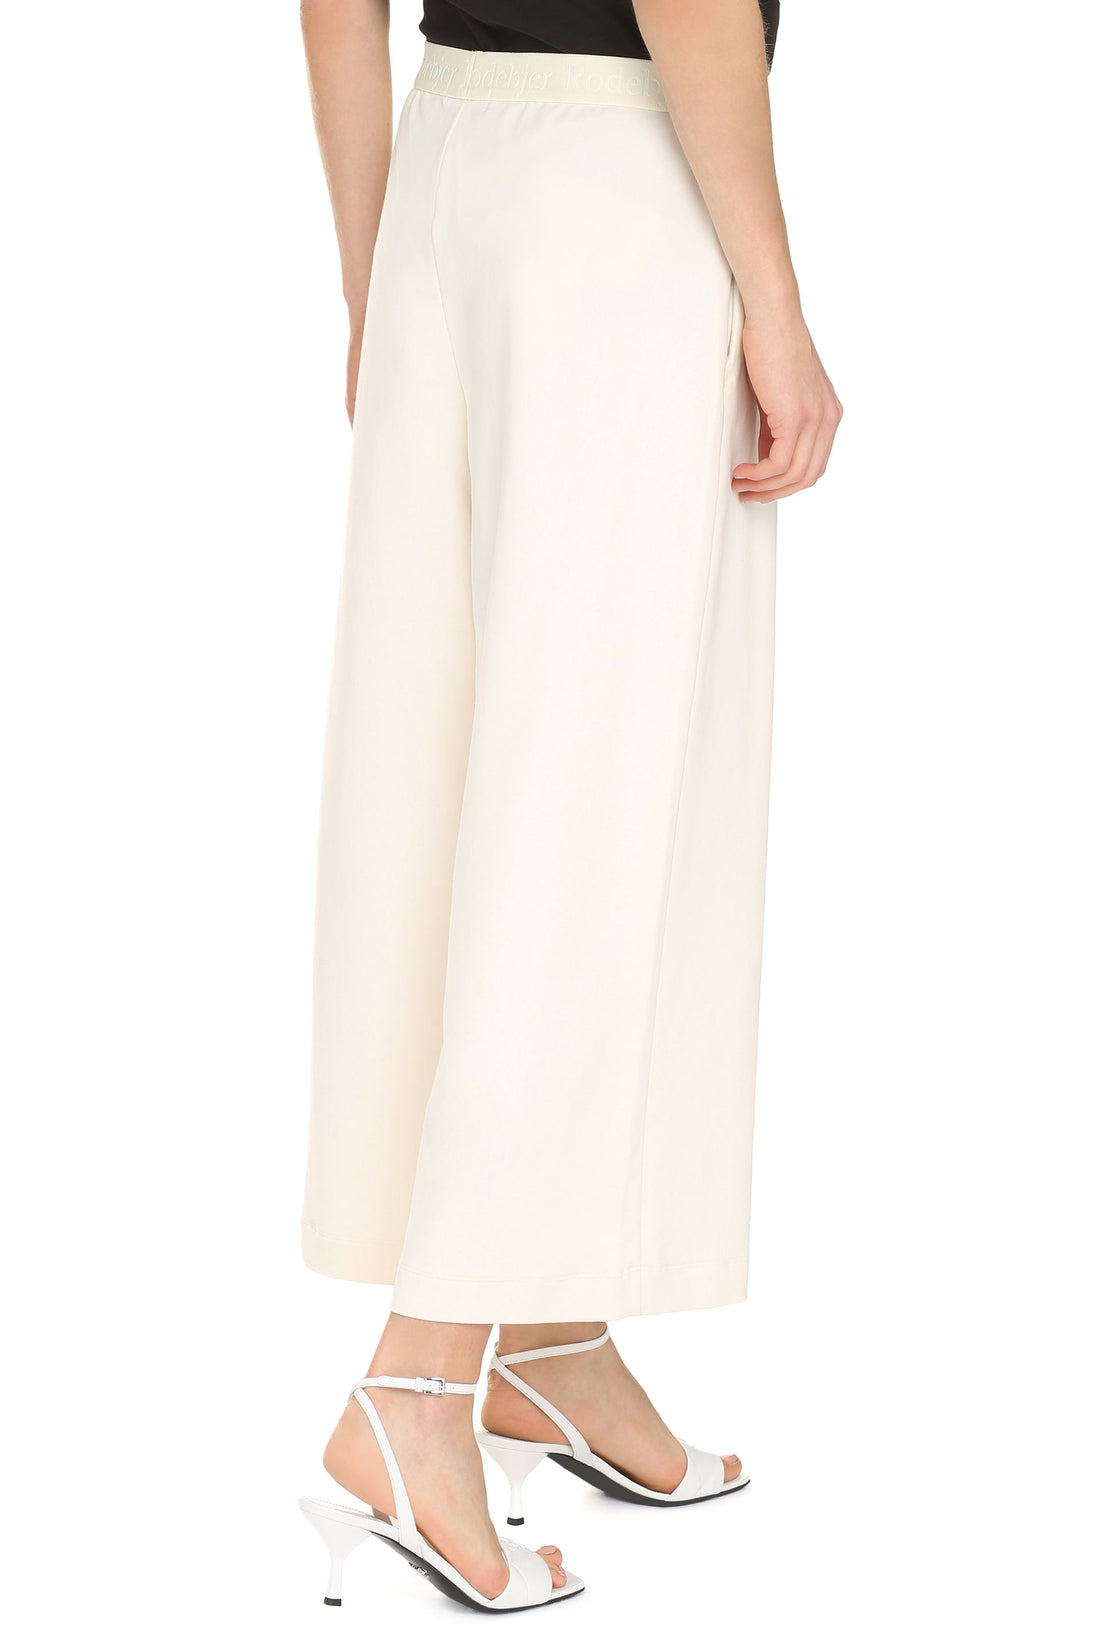 Rodebjer-OUTLET-SALE-Roma wide leg trousers-ARCHIVIST